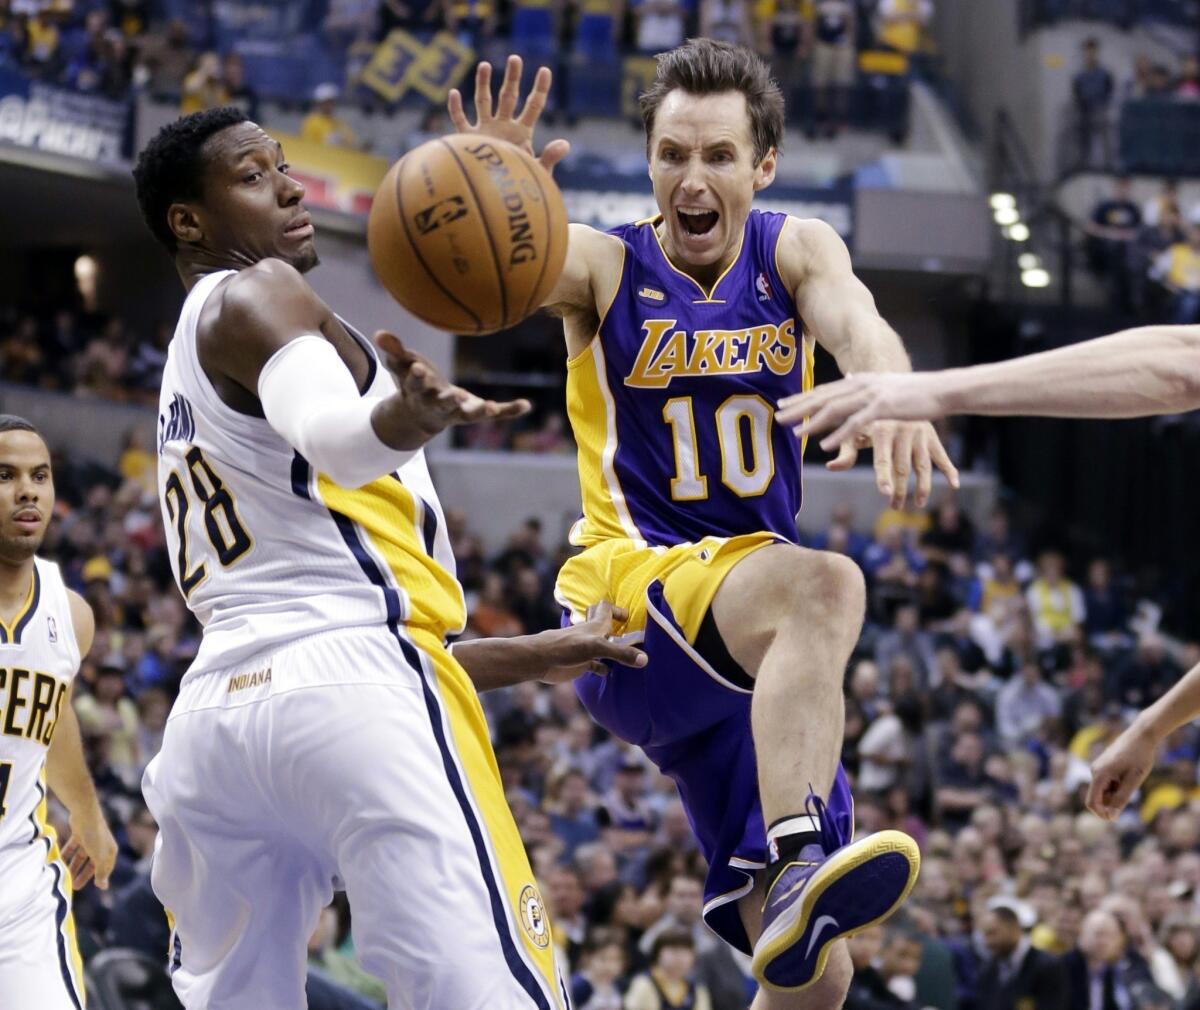 Lakers guard Steve Nash, right, loses the ball while attempting to shoot over Indiana Pacers center Ian Mahinmi.